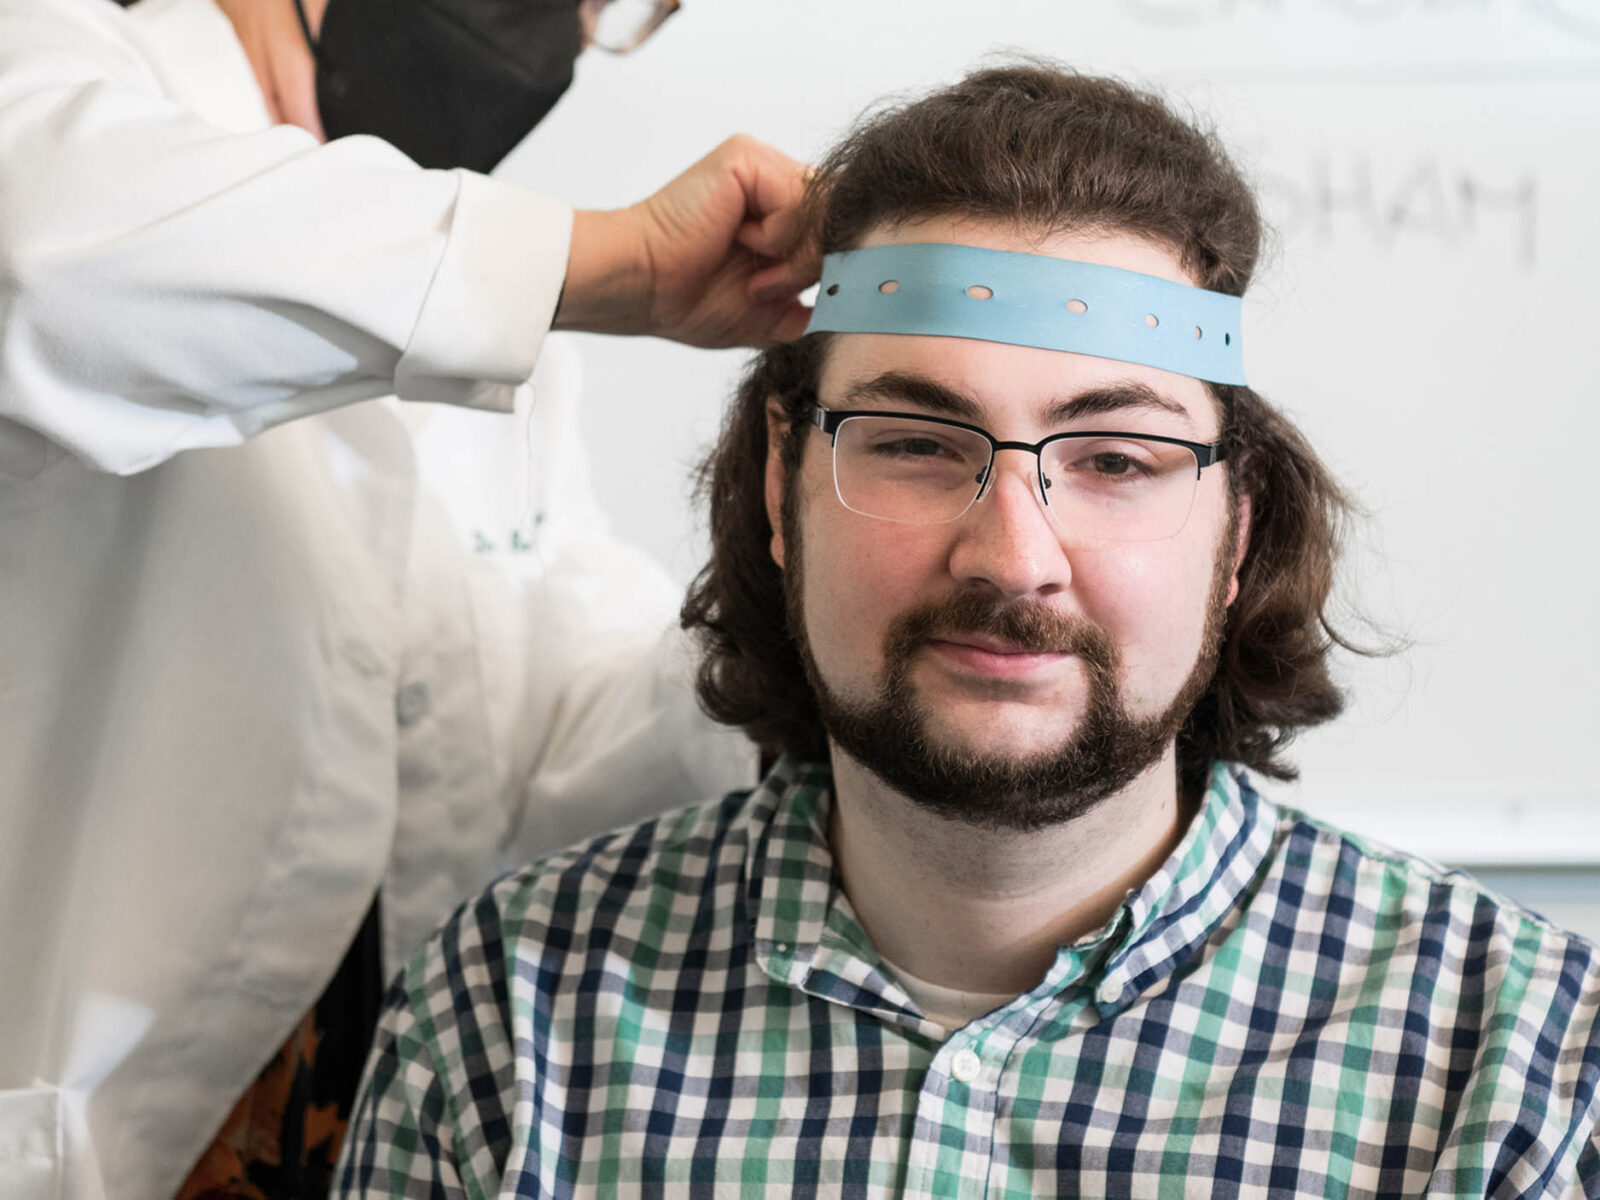 psychology student aids in psychological testing for an experiment